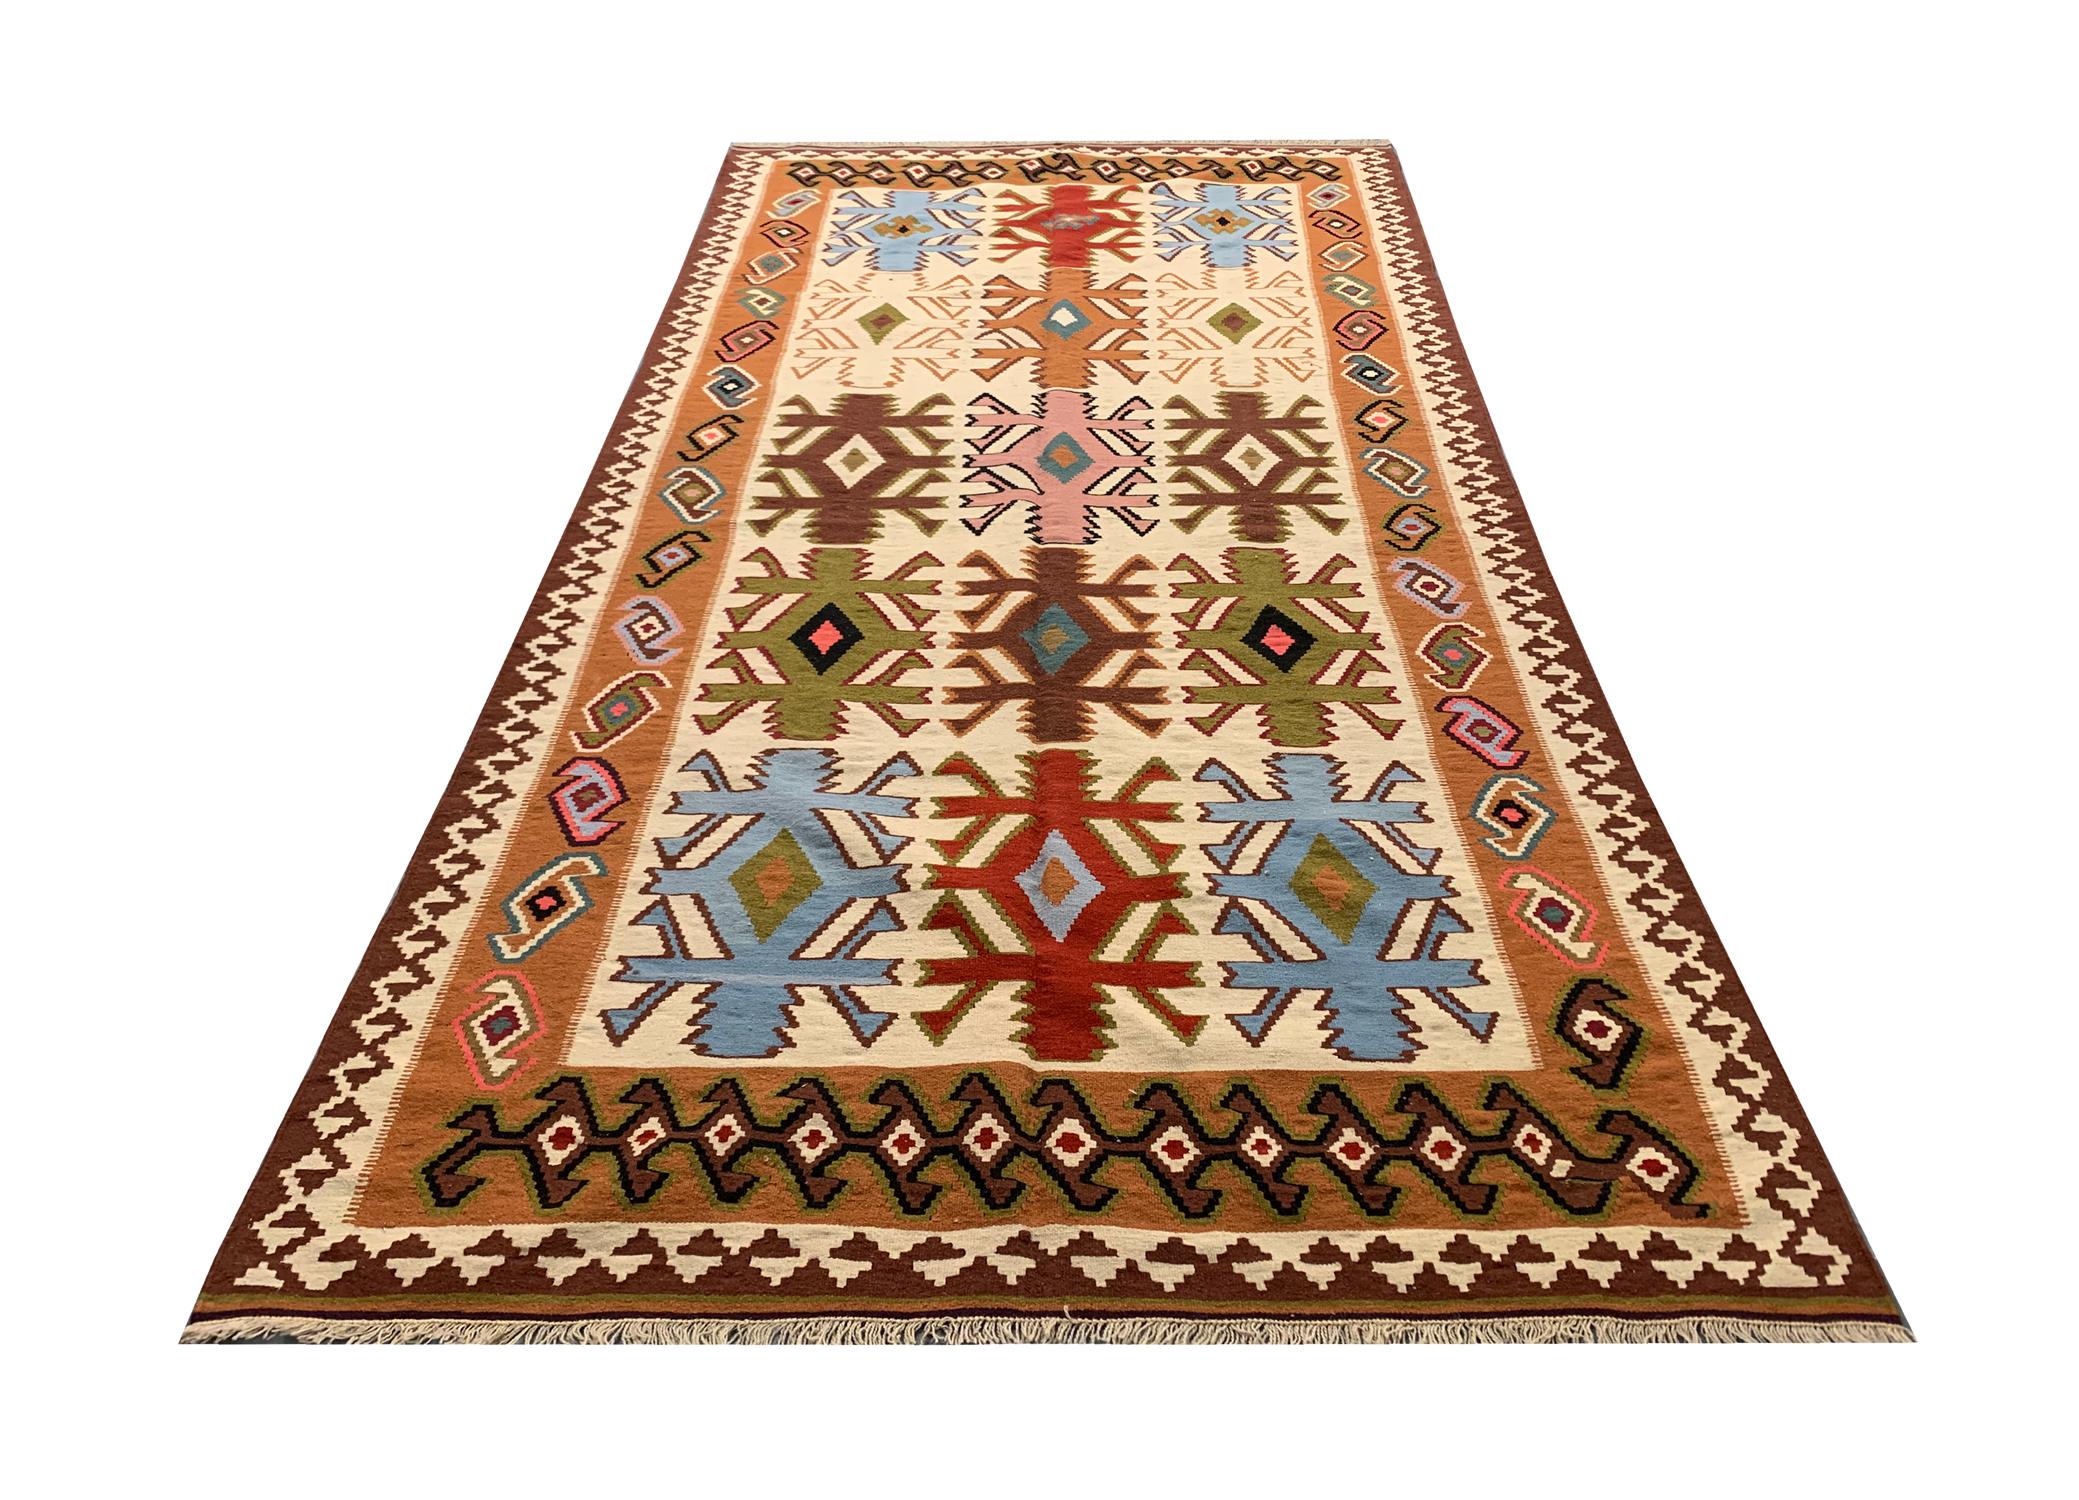 This elegant handwoven wool area rug was constructed in the late 20th century around 1980 in Turkey. The design features cream, brown, blue and rust colours that make up the fantastic elegant repeat pattern tribal design. Both the colour and design